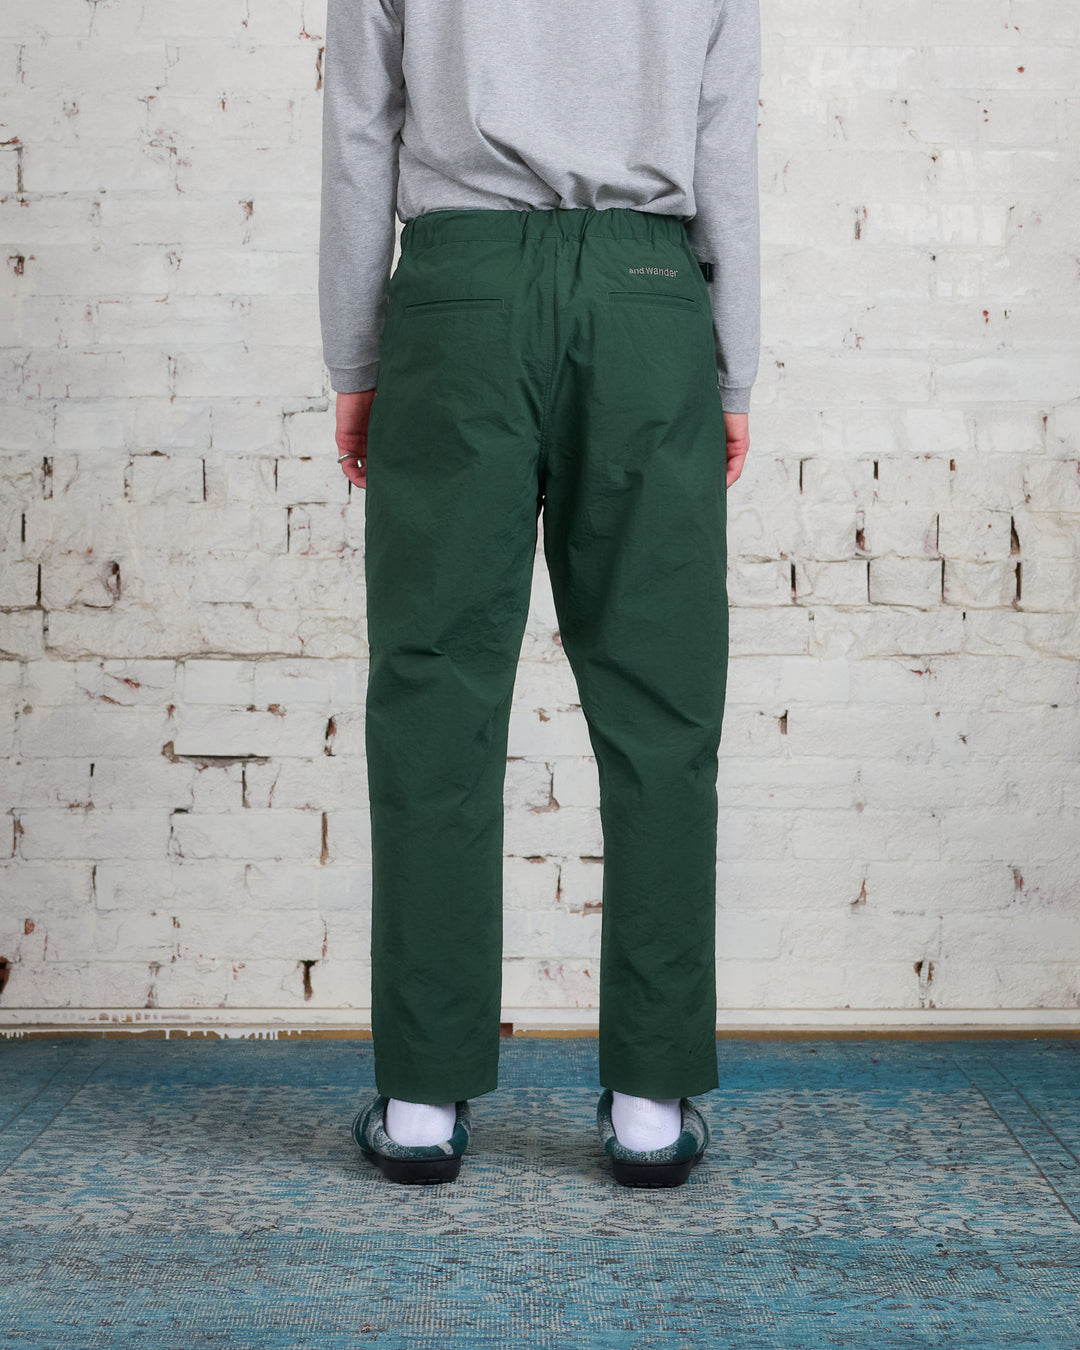 Gray Tapered Lounge Pants by Rick Owens on Sale